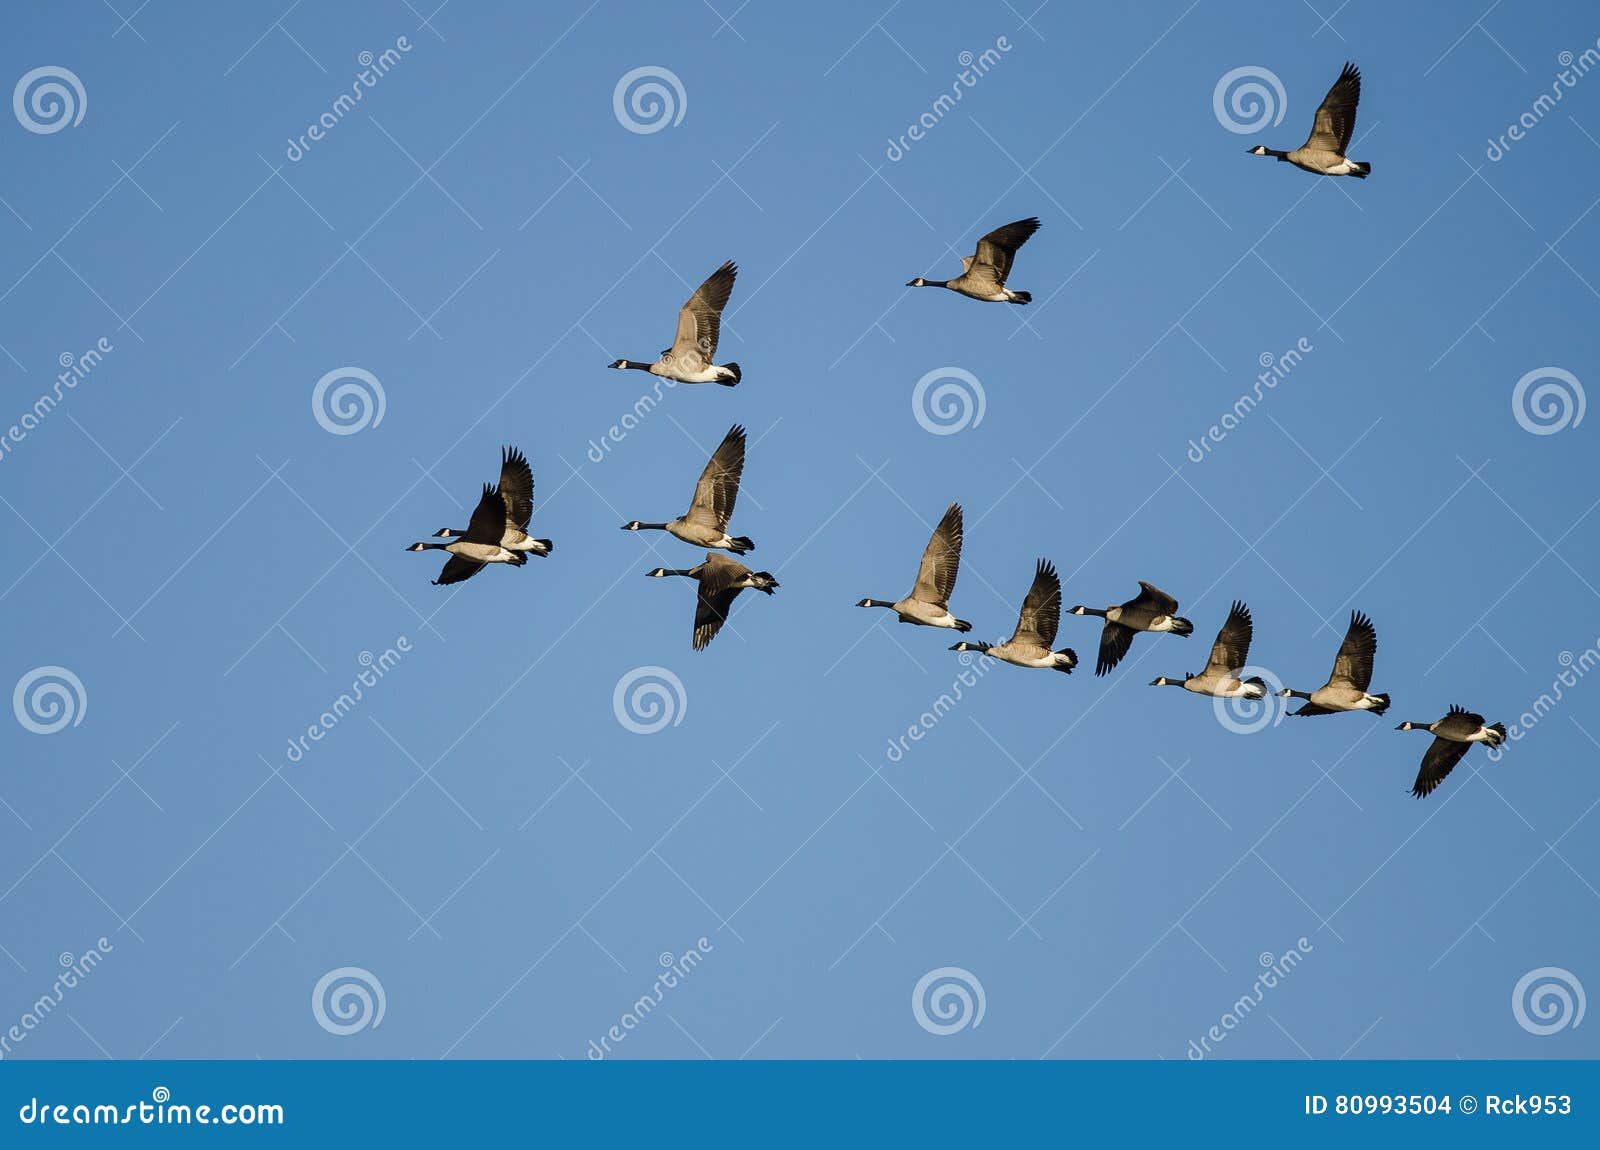 flock of canada geese flying in a blue sky